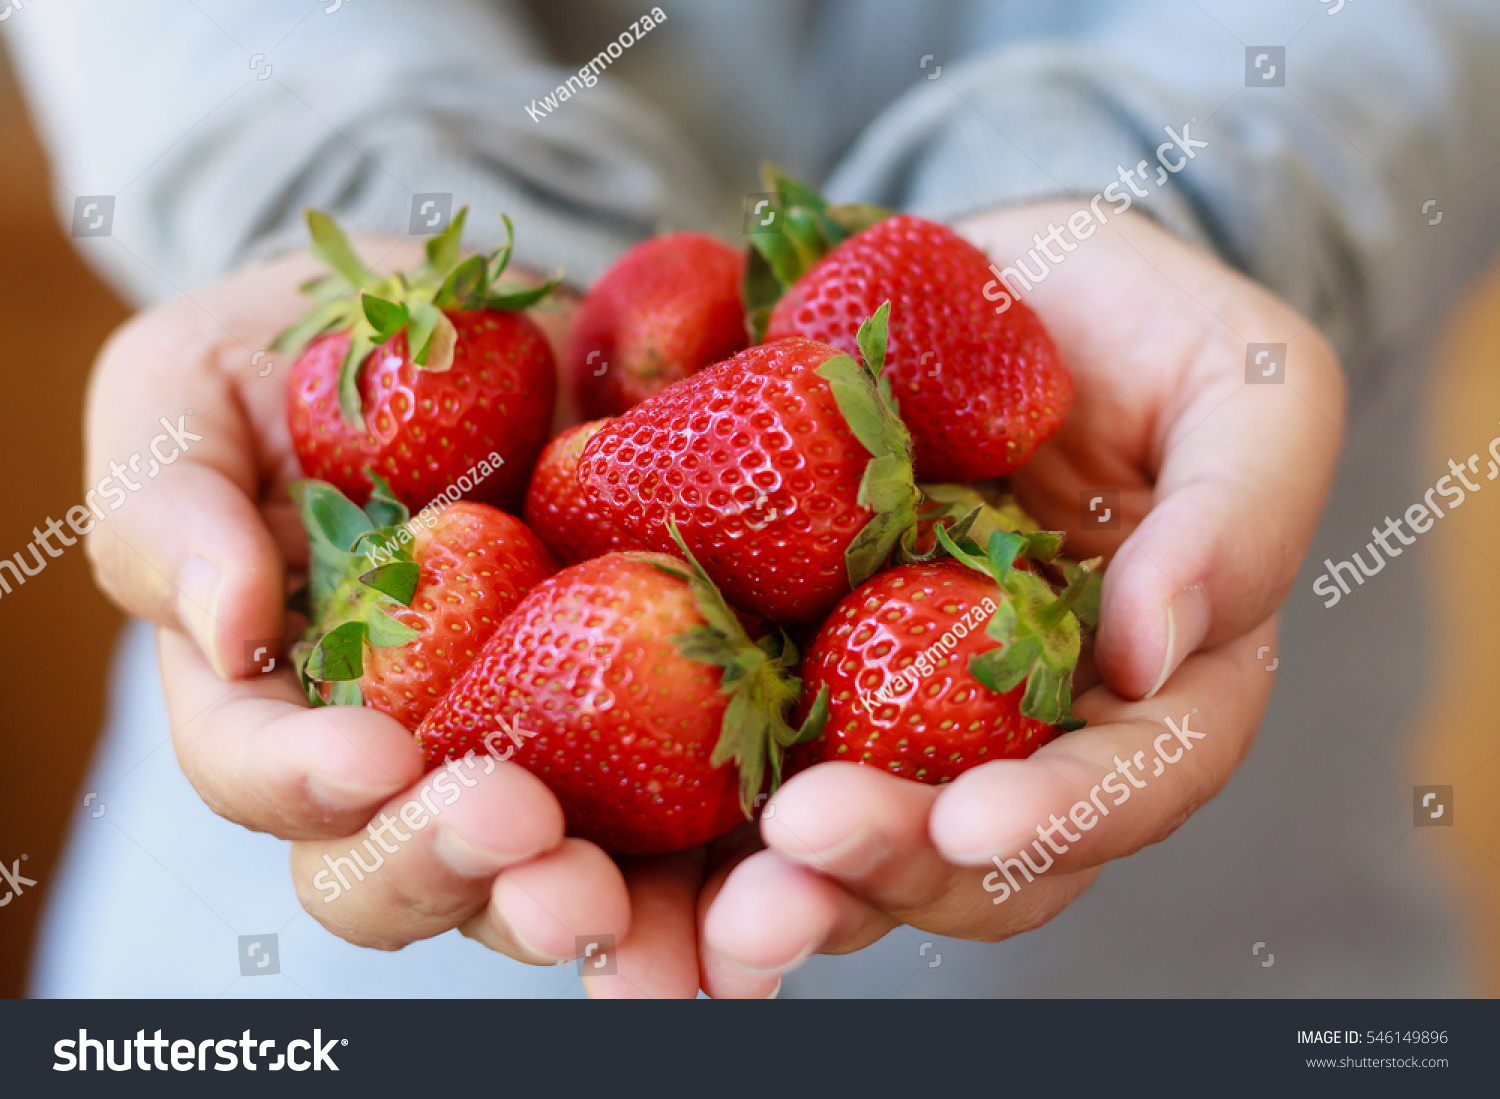 holding fresh strawberry in hands #546149896